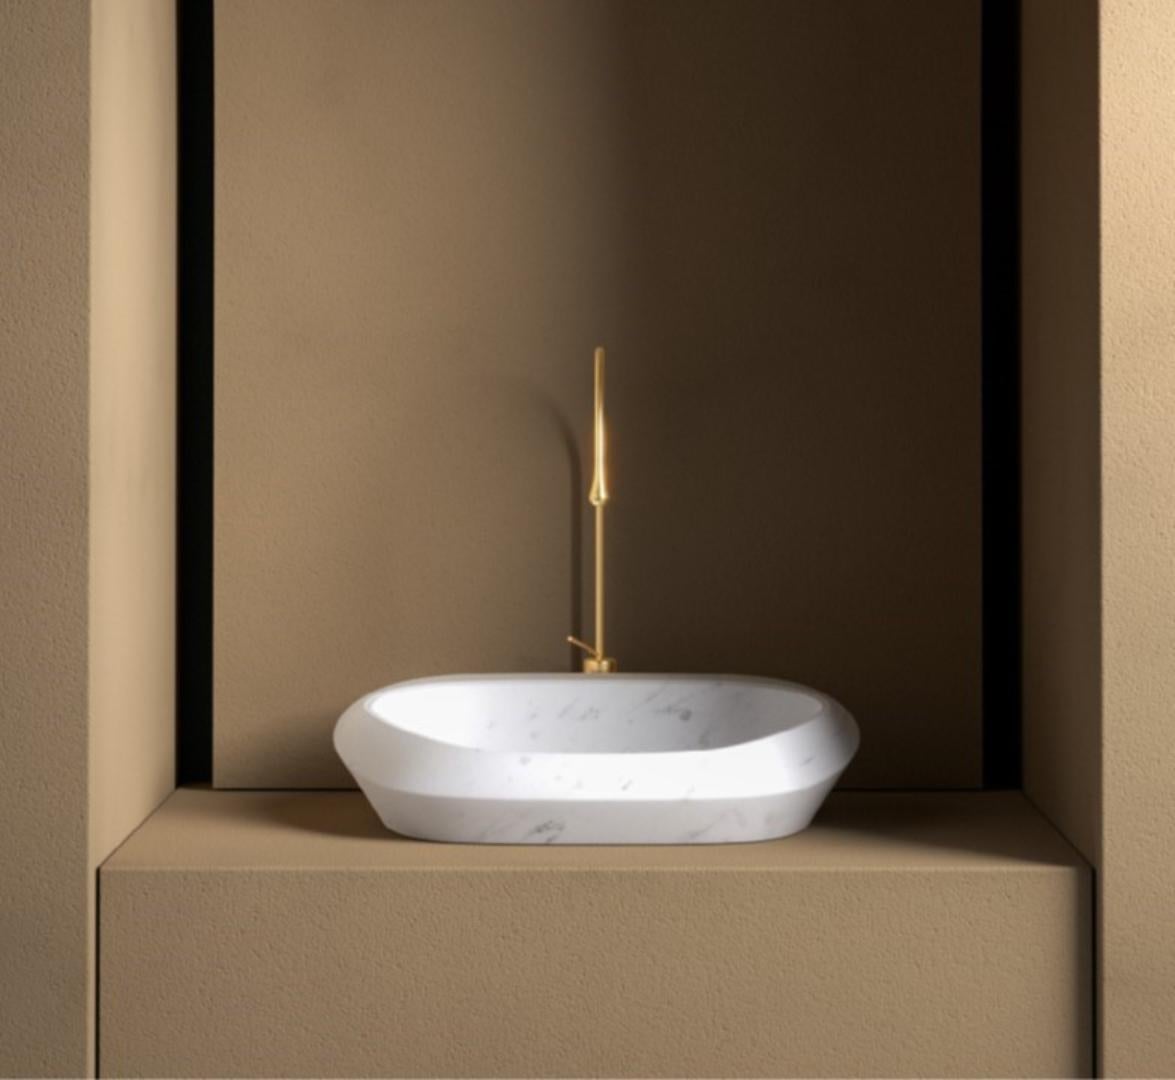 Small Kyknos Tosca washbasin by Marmi Serafini
Materials: Kyknos marble.
Dimensions: D 44 x W 58 x H 17 cm
Available in other marbles.
Tap not included.

Tosca is a magnificent washbasin made of a single solid piece of marble.
The large dimensions